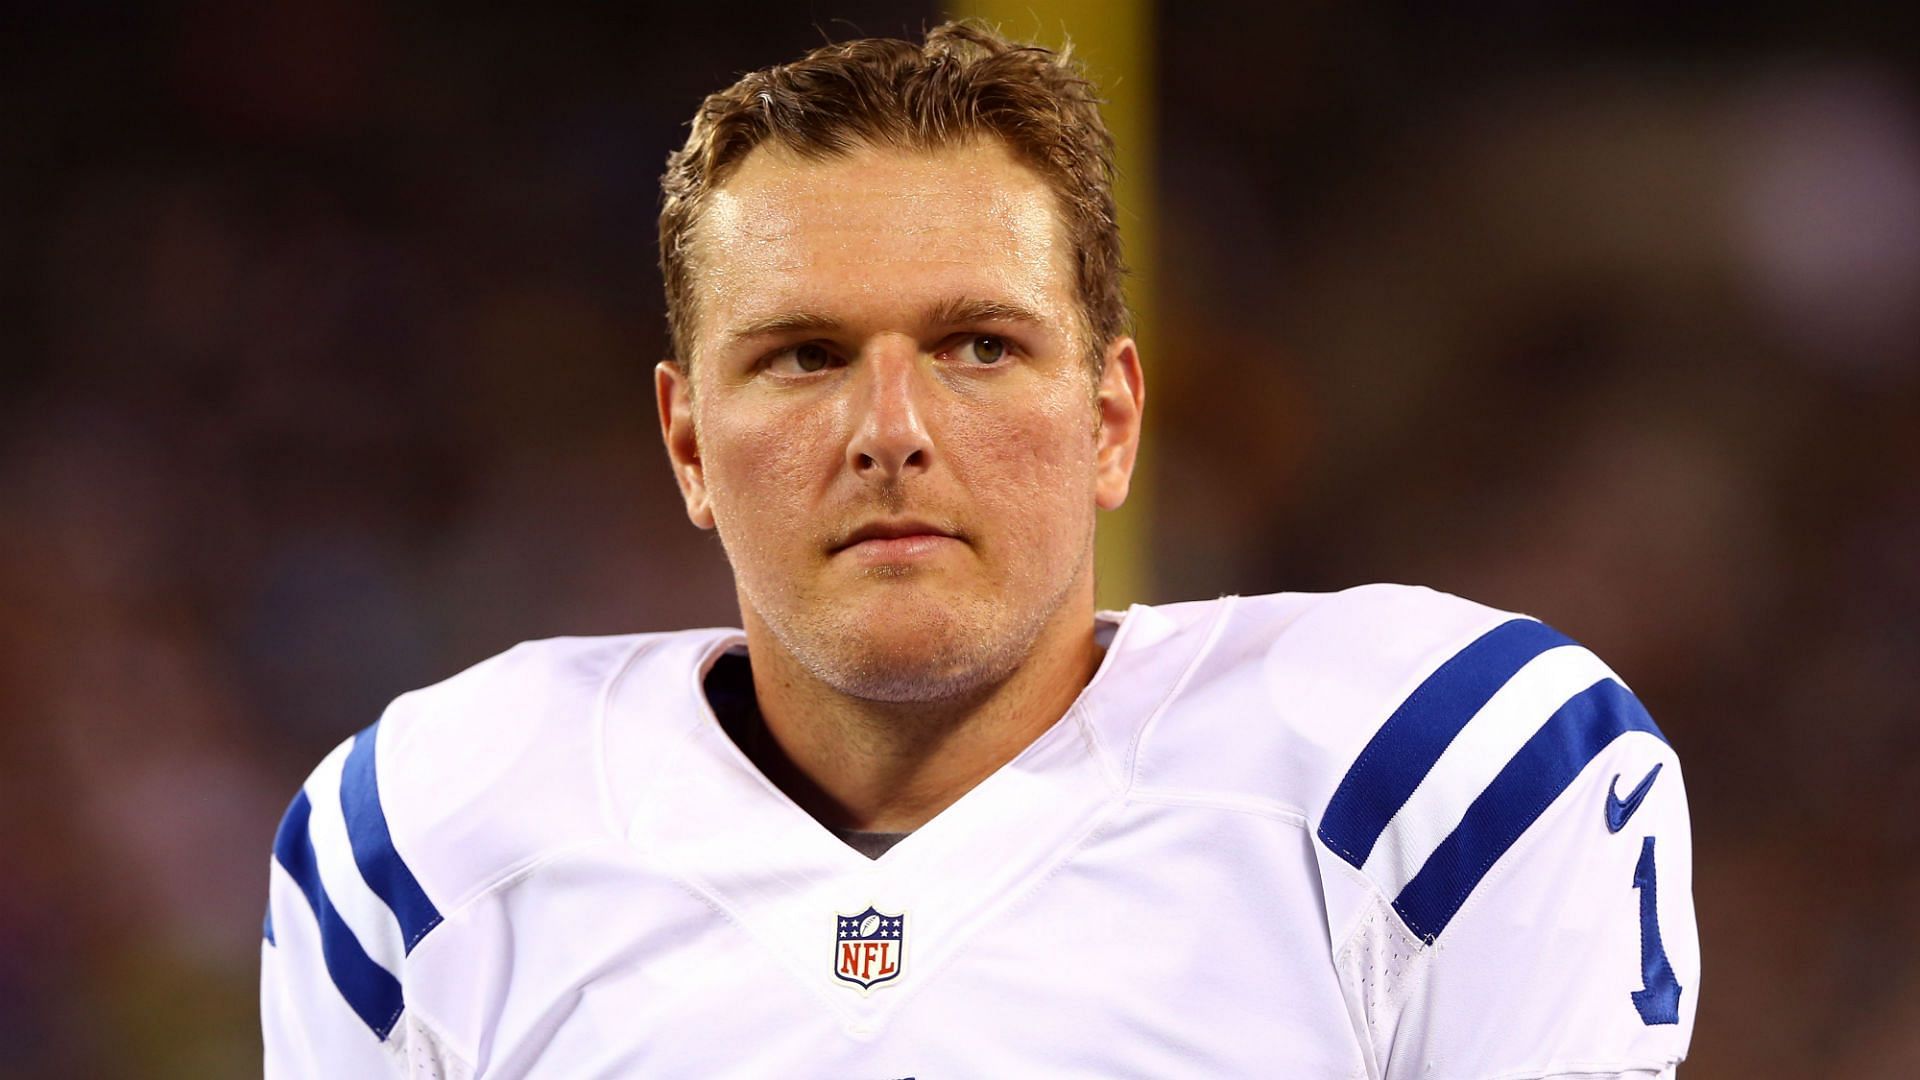 Pat McAfee started his NFL career in 2009.